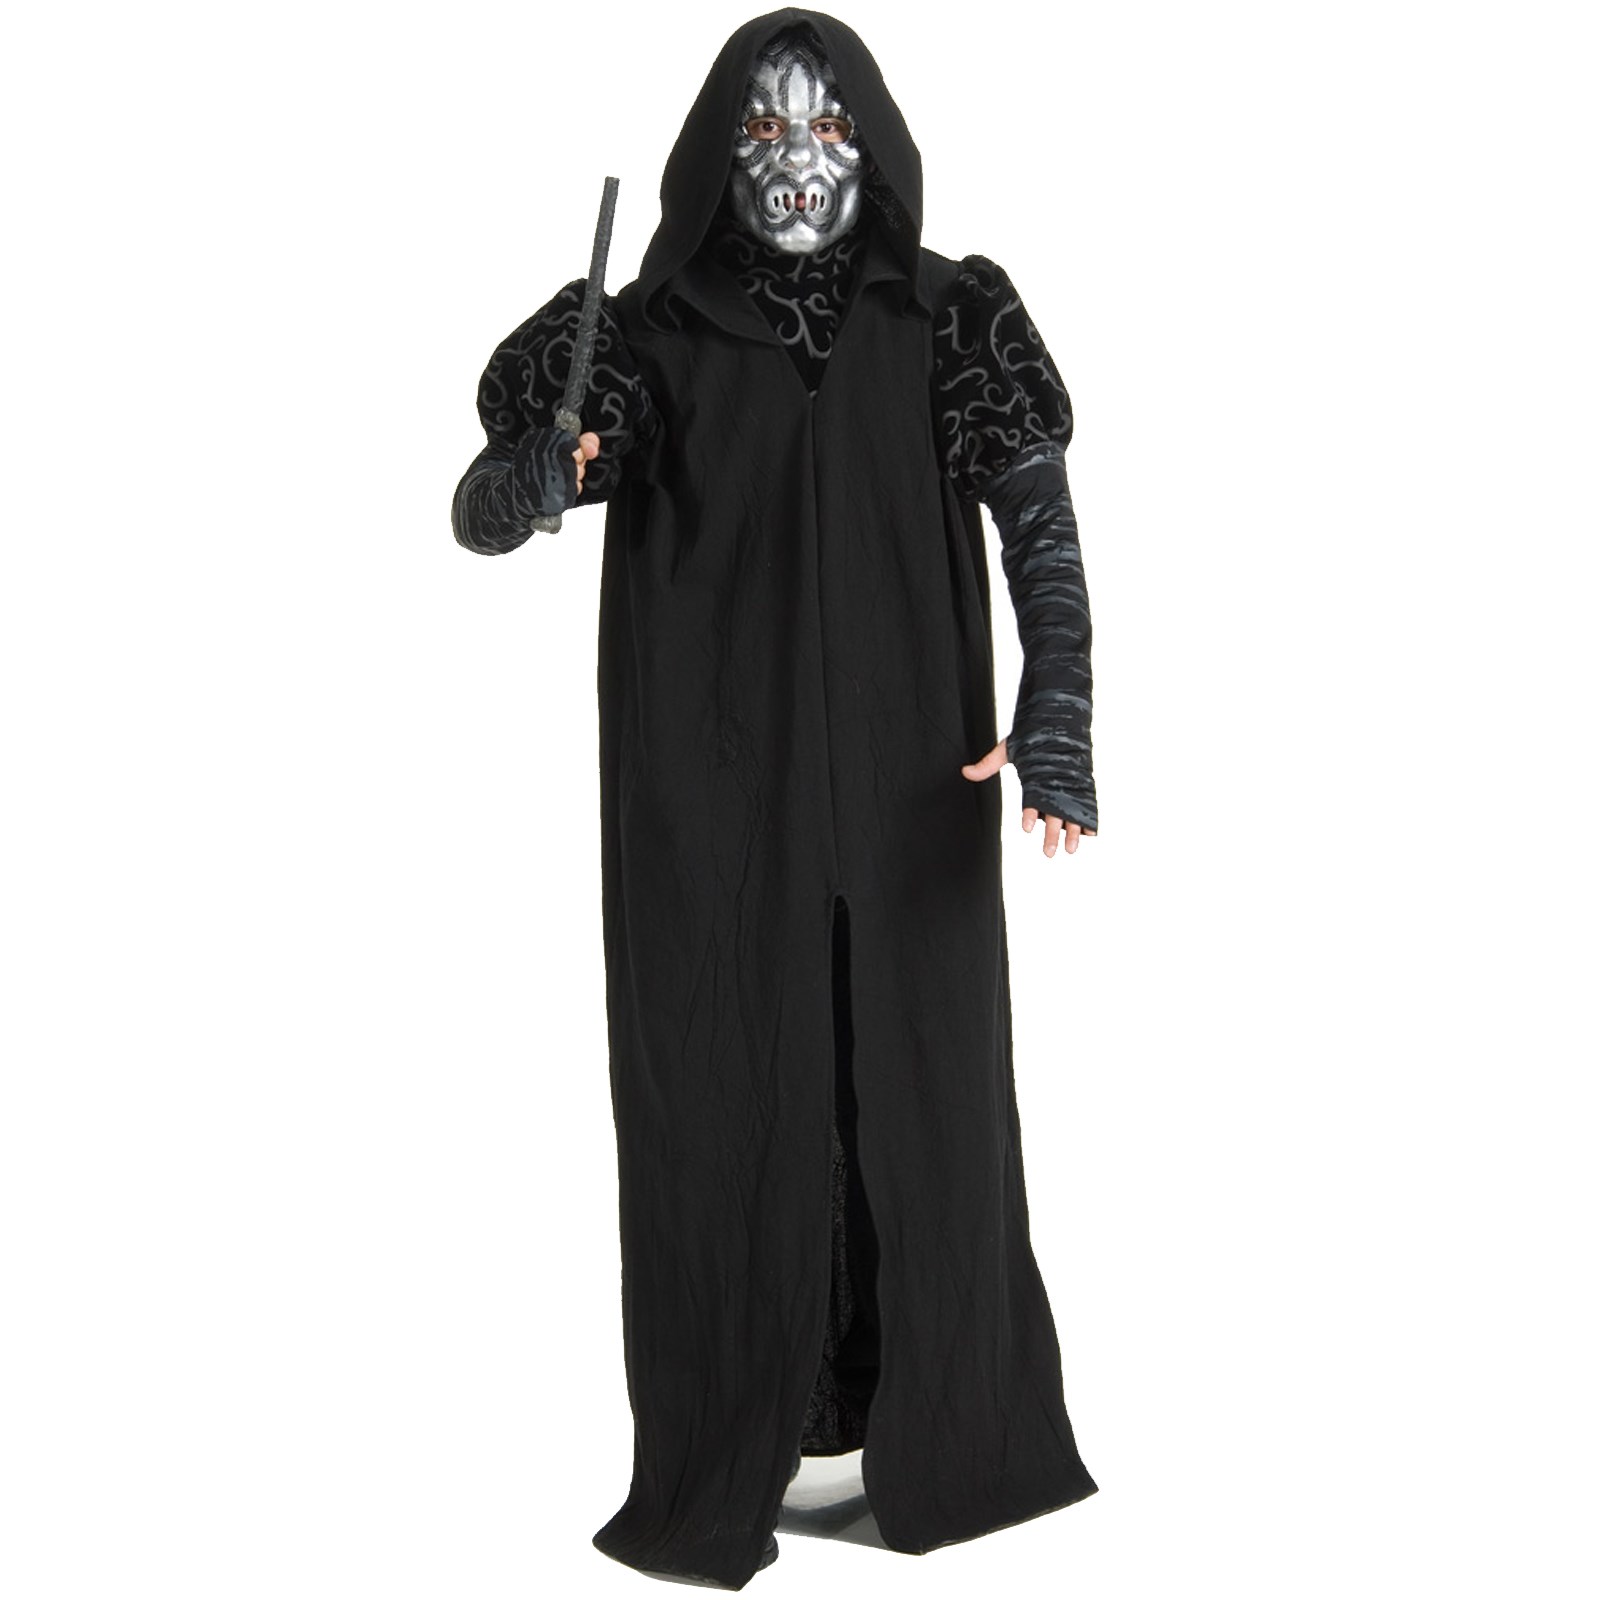 Harry Potter & The Half-Blood Prince Deluxe Death Eater Adult Costume